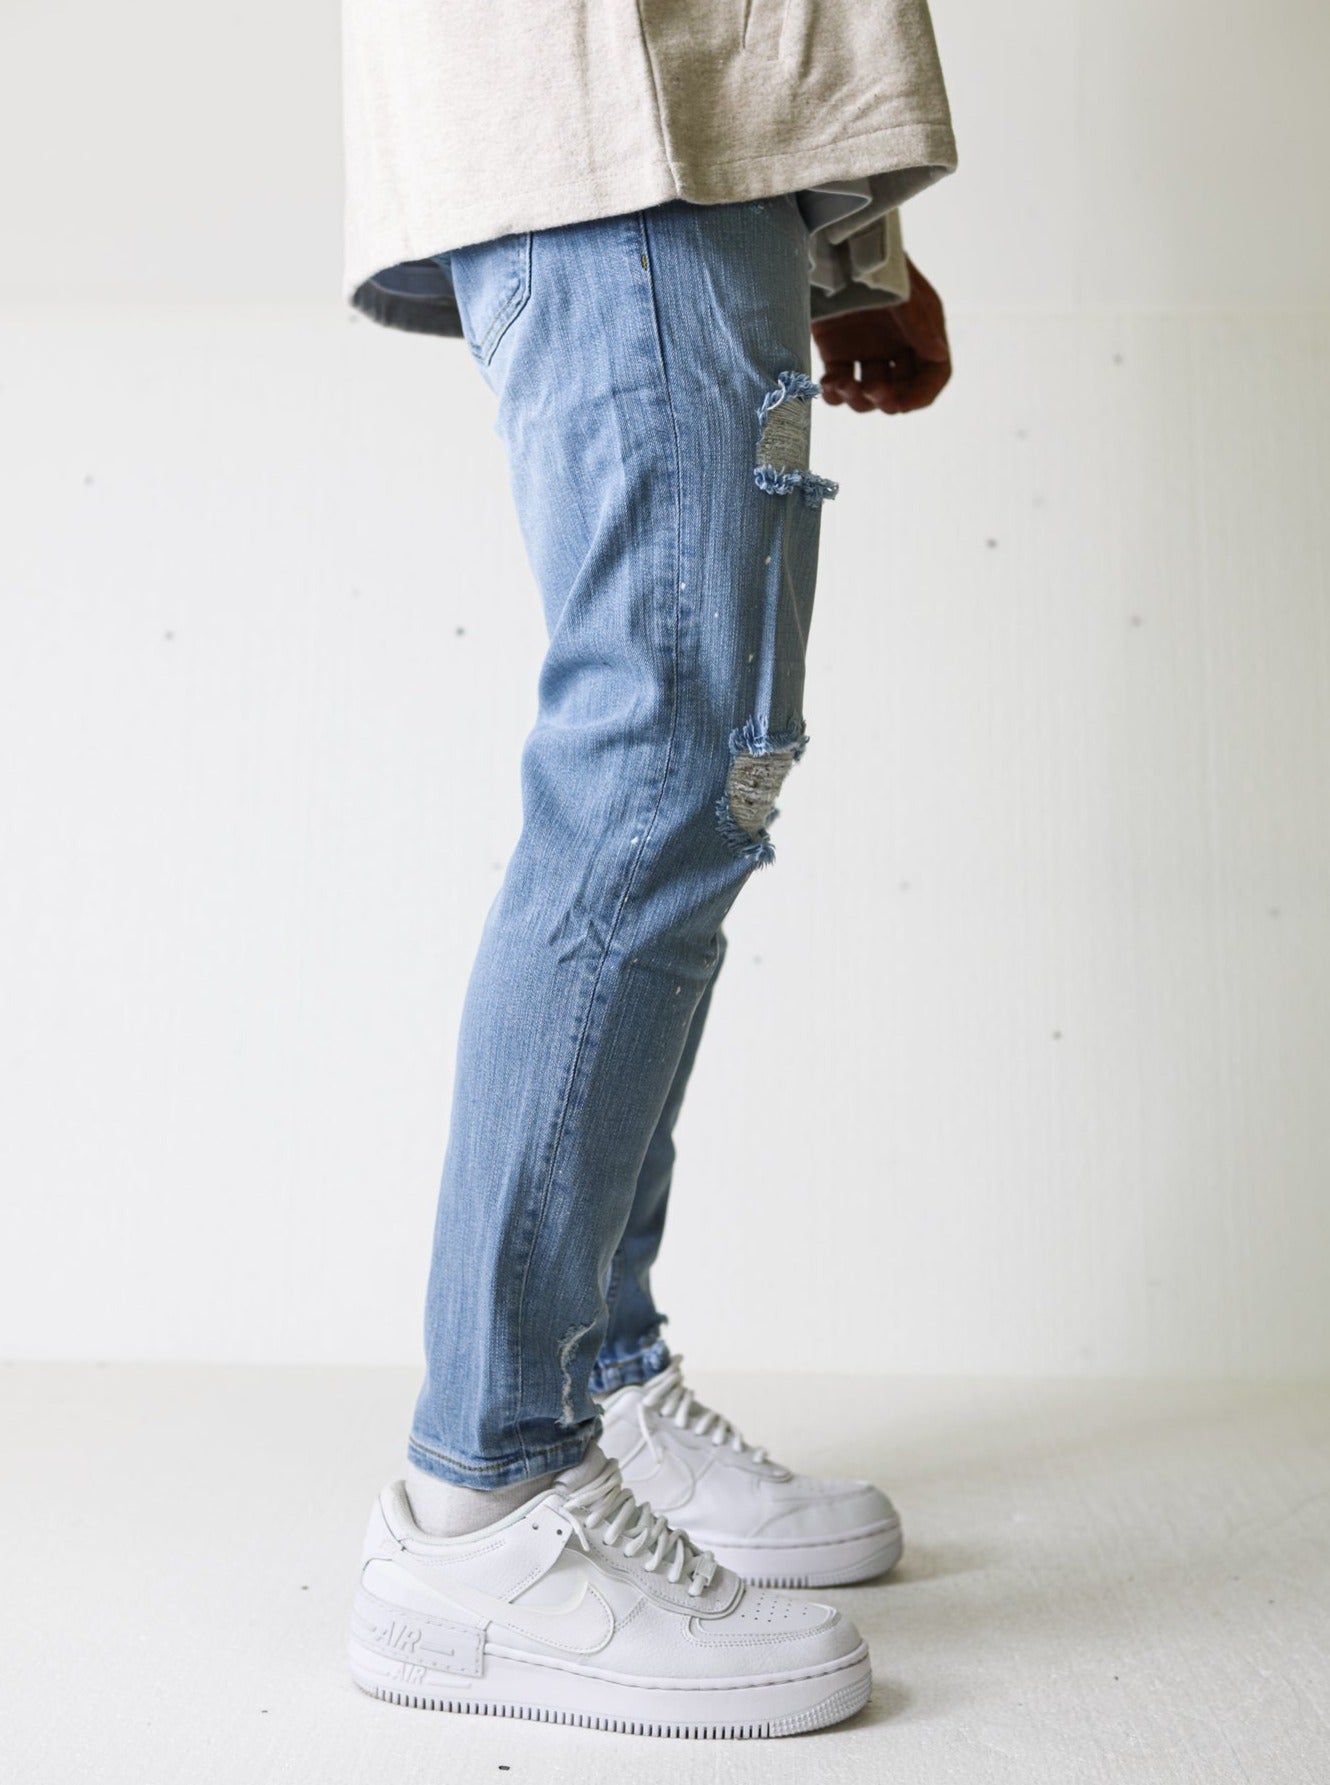 Premium Ripped Light Blue Jeans - UNEFFECTED STUDIOS® - JEANS - UNEFFECTED STUDIOS®